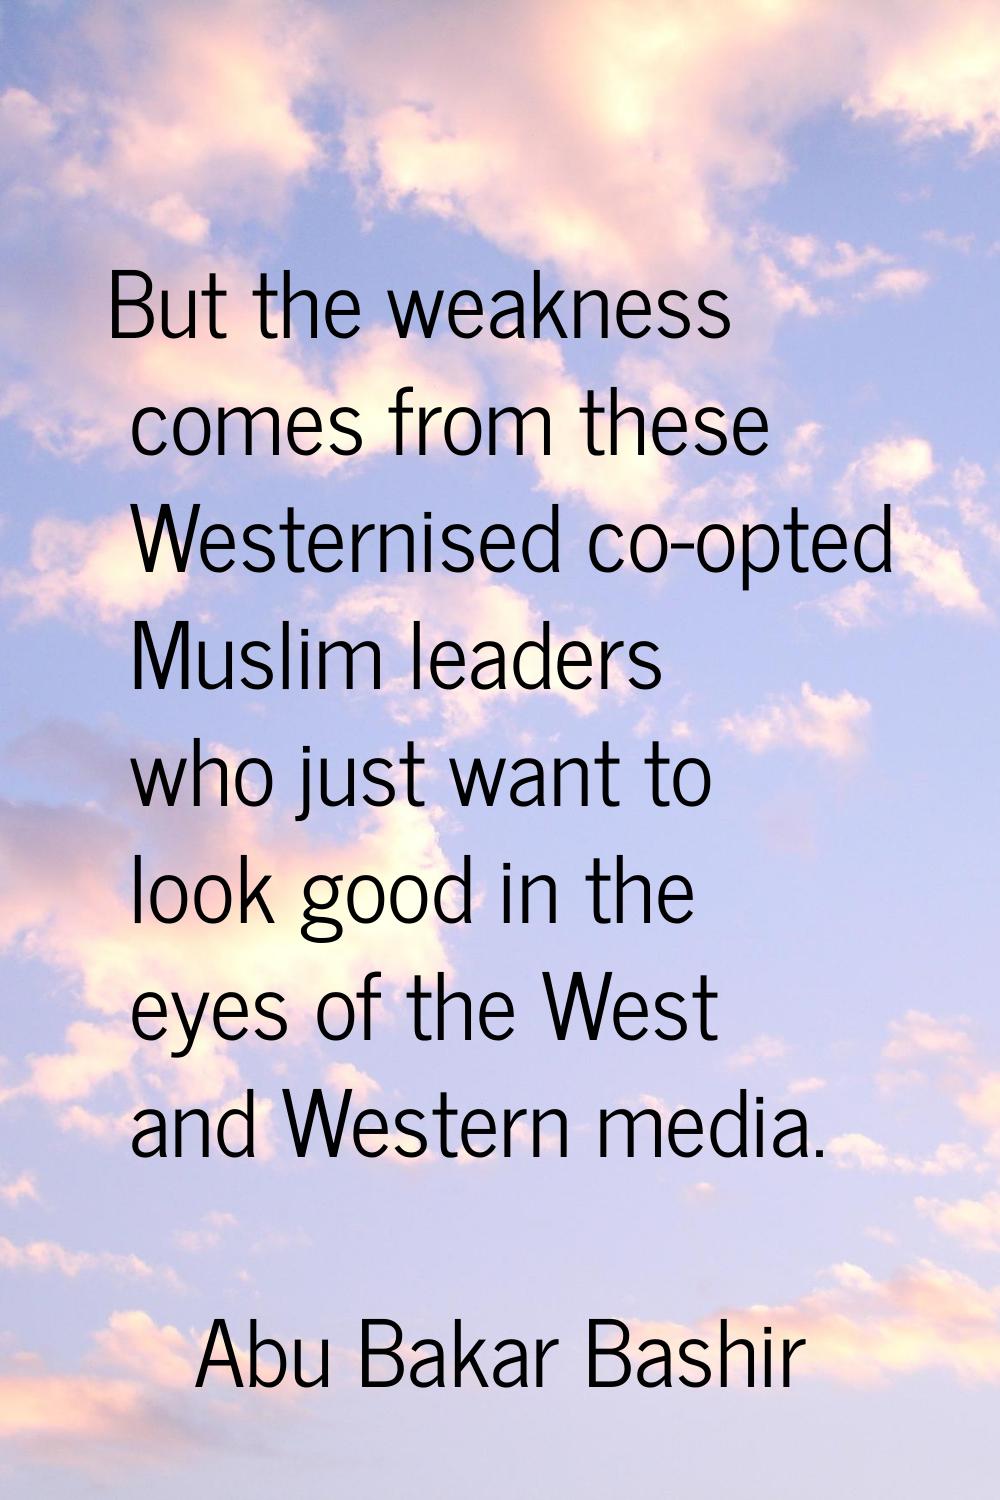 But the weakness comes from these Westernised co-opted Muslim leaders who just want to look good in